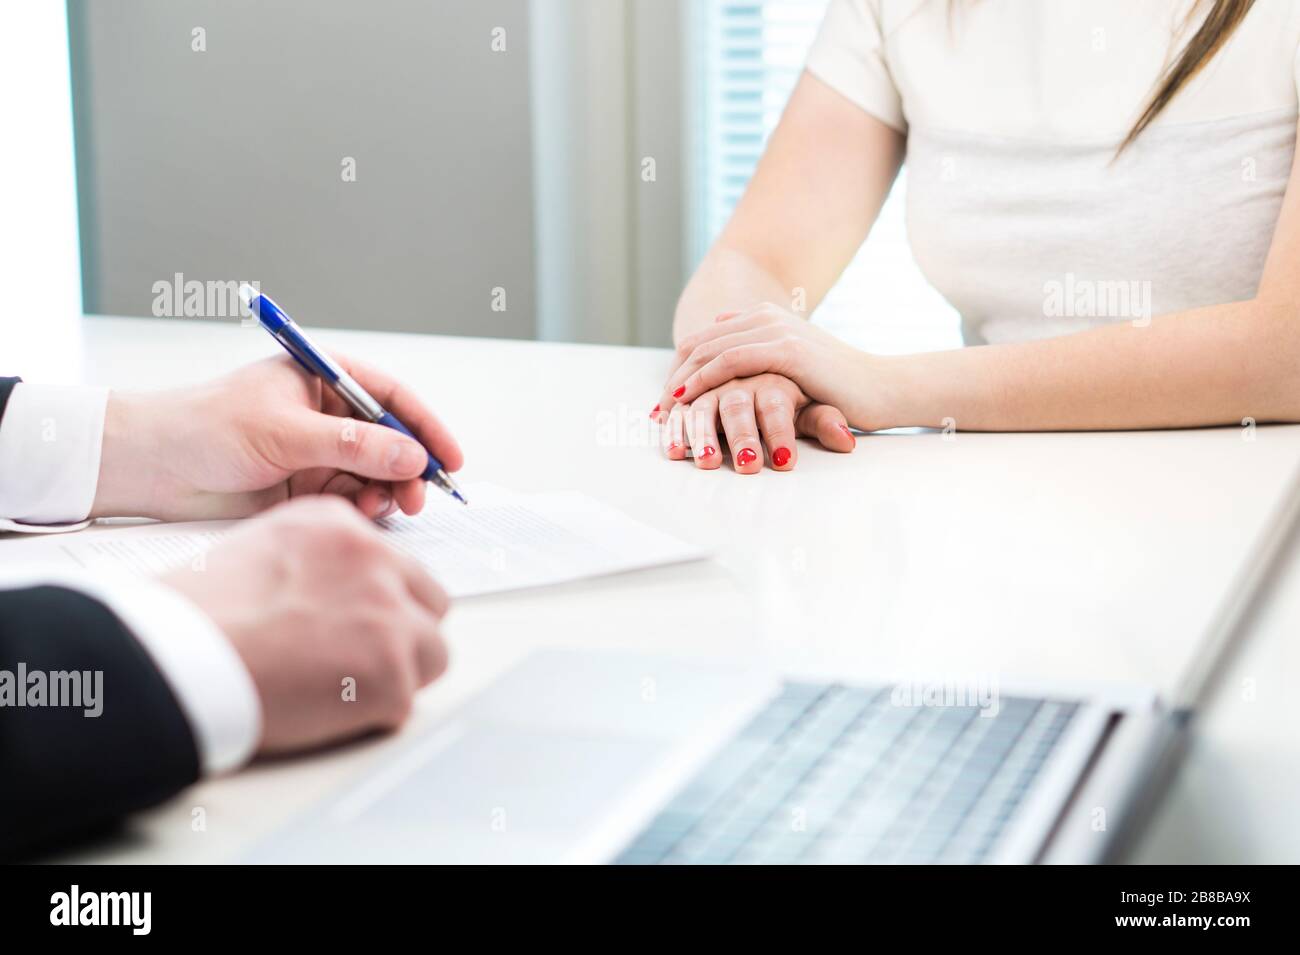 Young woman in job interview with business man. Interviewer writing notes. Lady having meeting with boss or executive manager. Stock Photo